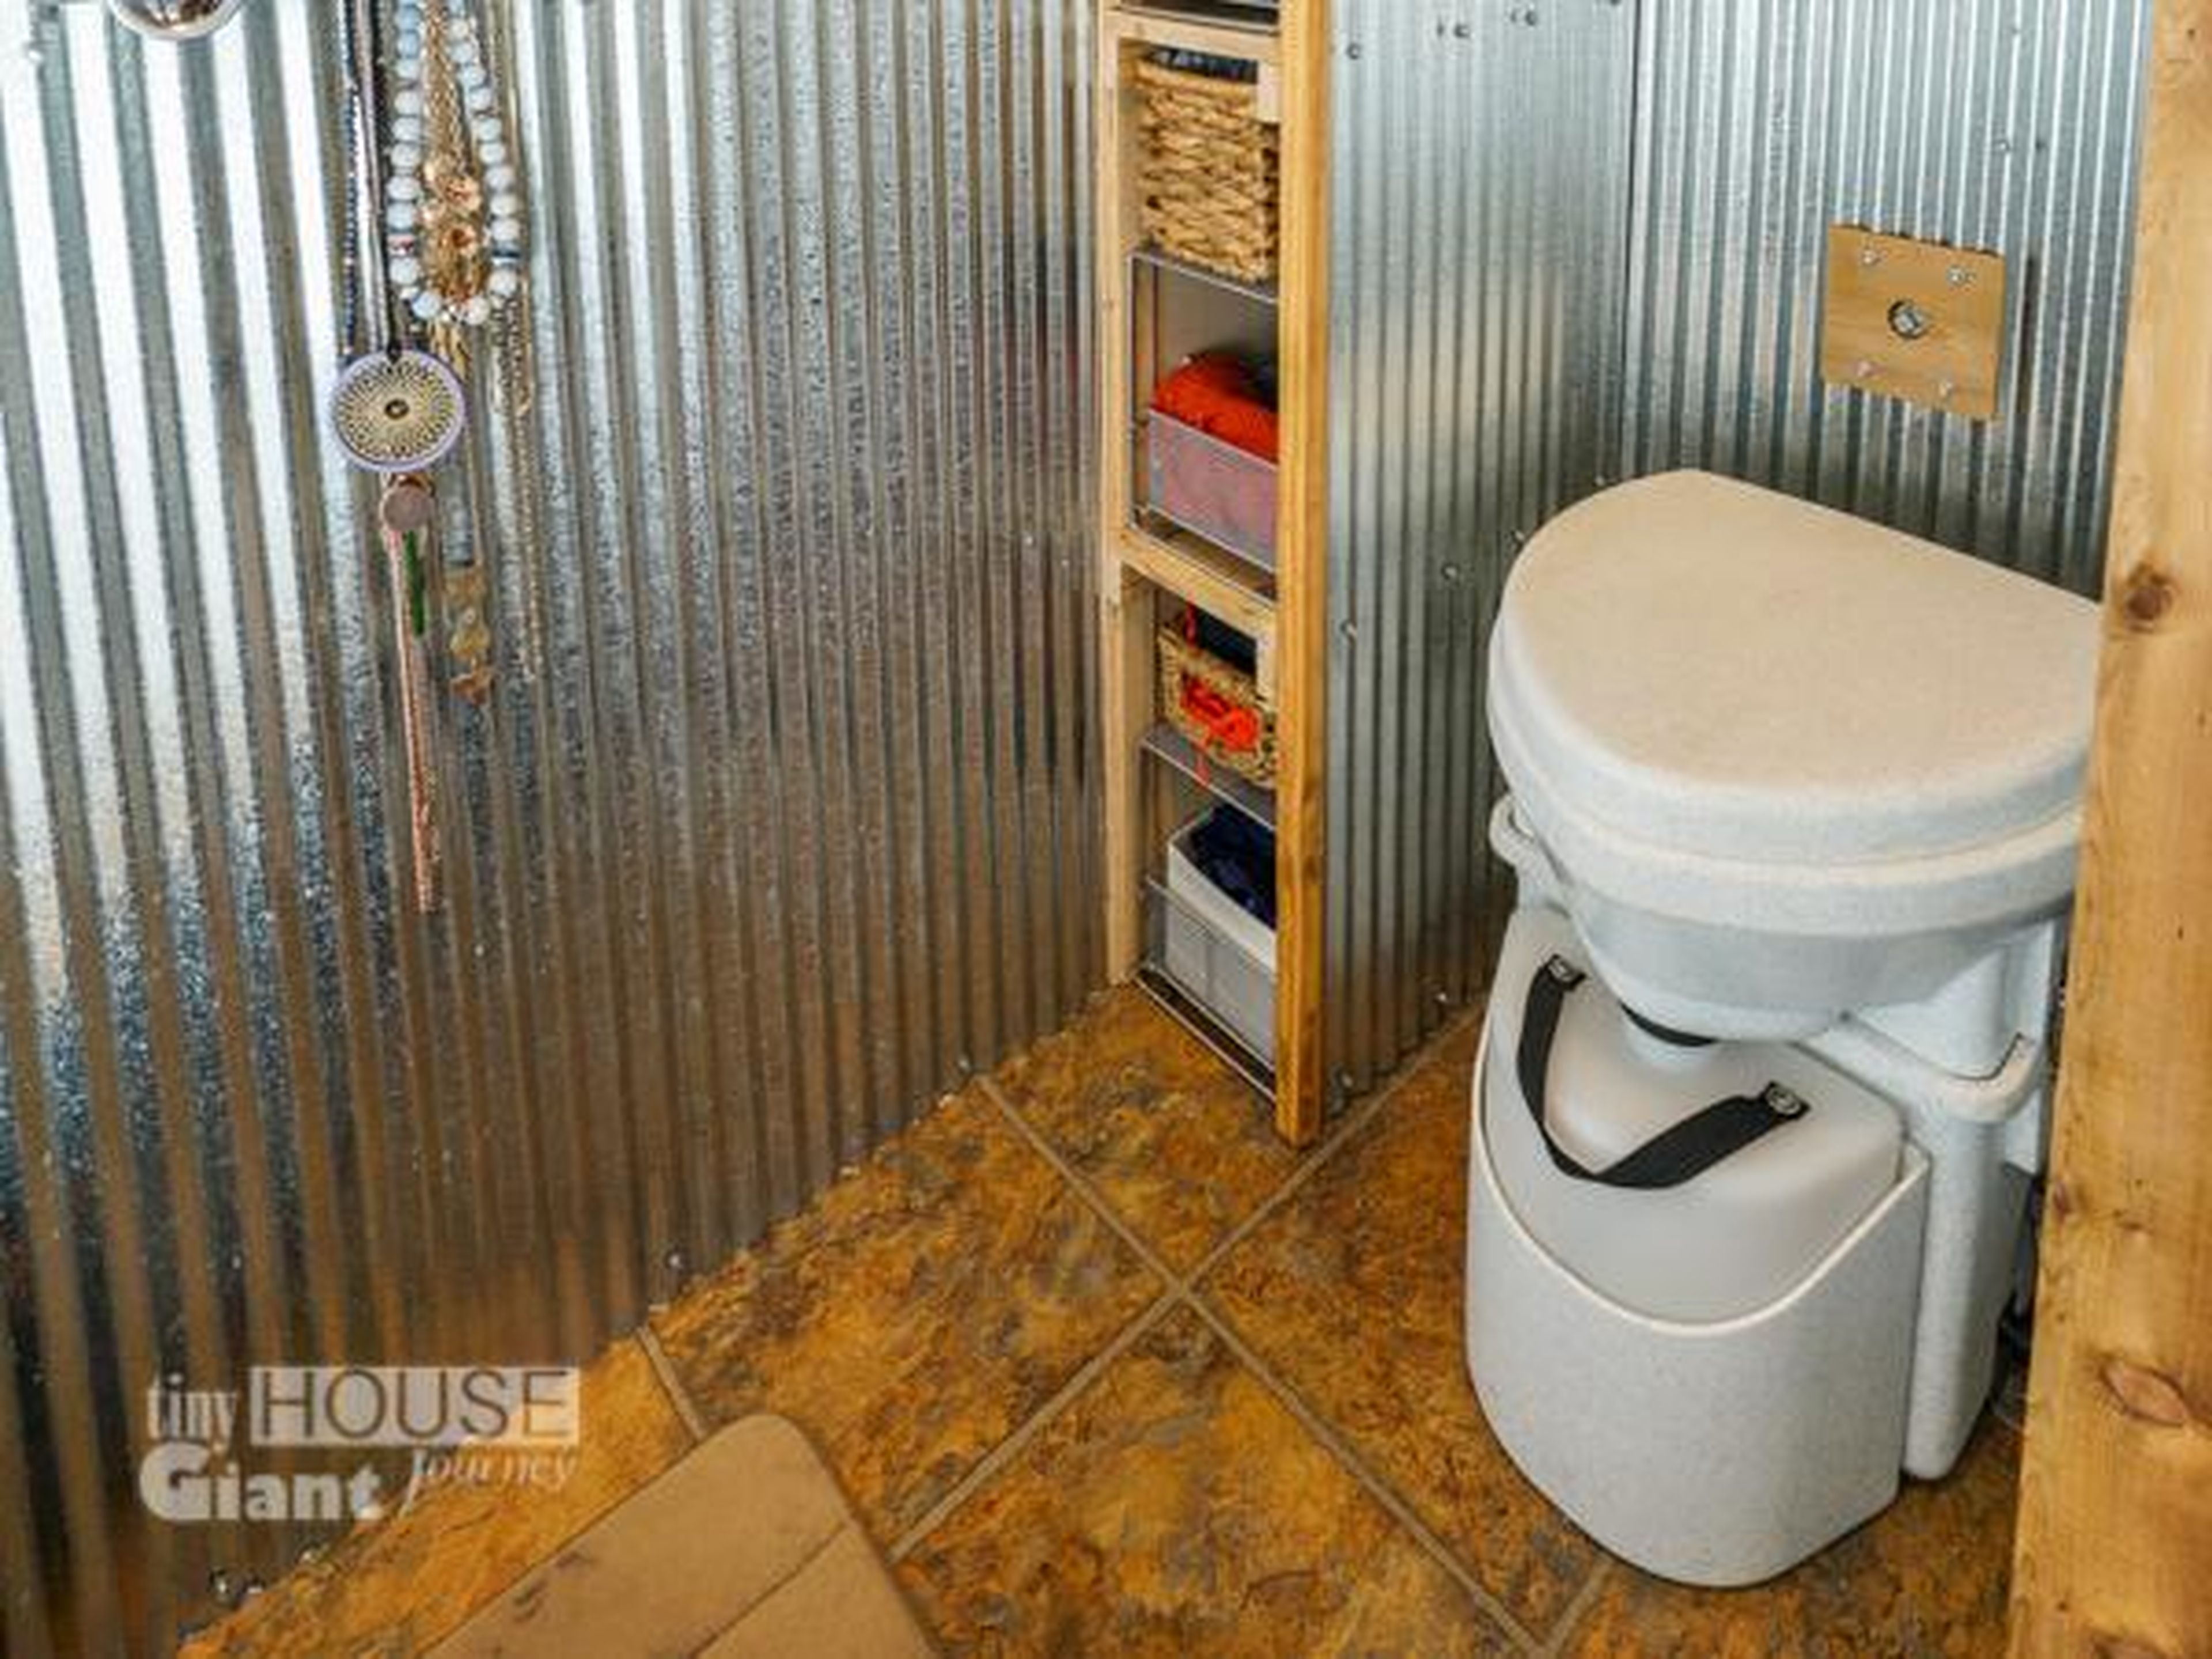 The bathroom might also be a little different — most tiny homes use compost toilets. While these help with conservation, they do need to be emptied periodically. Jenna wrote in her blog it can also be a little awkward to explain